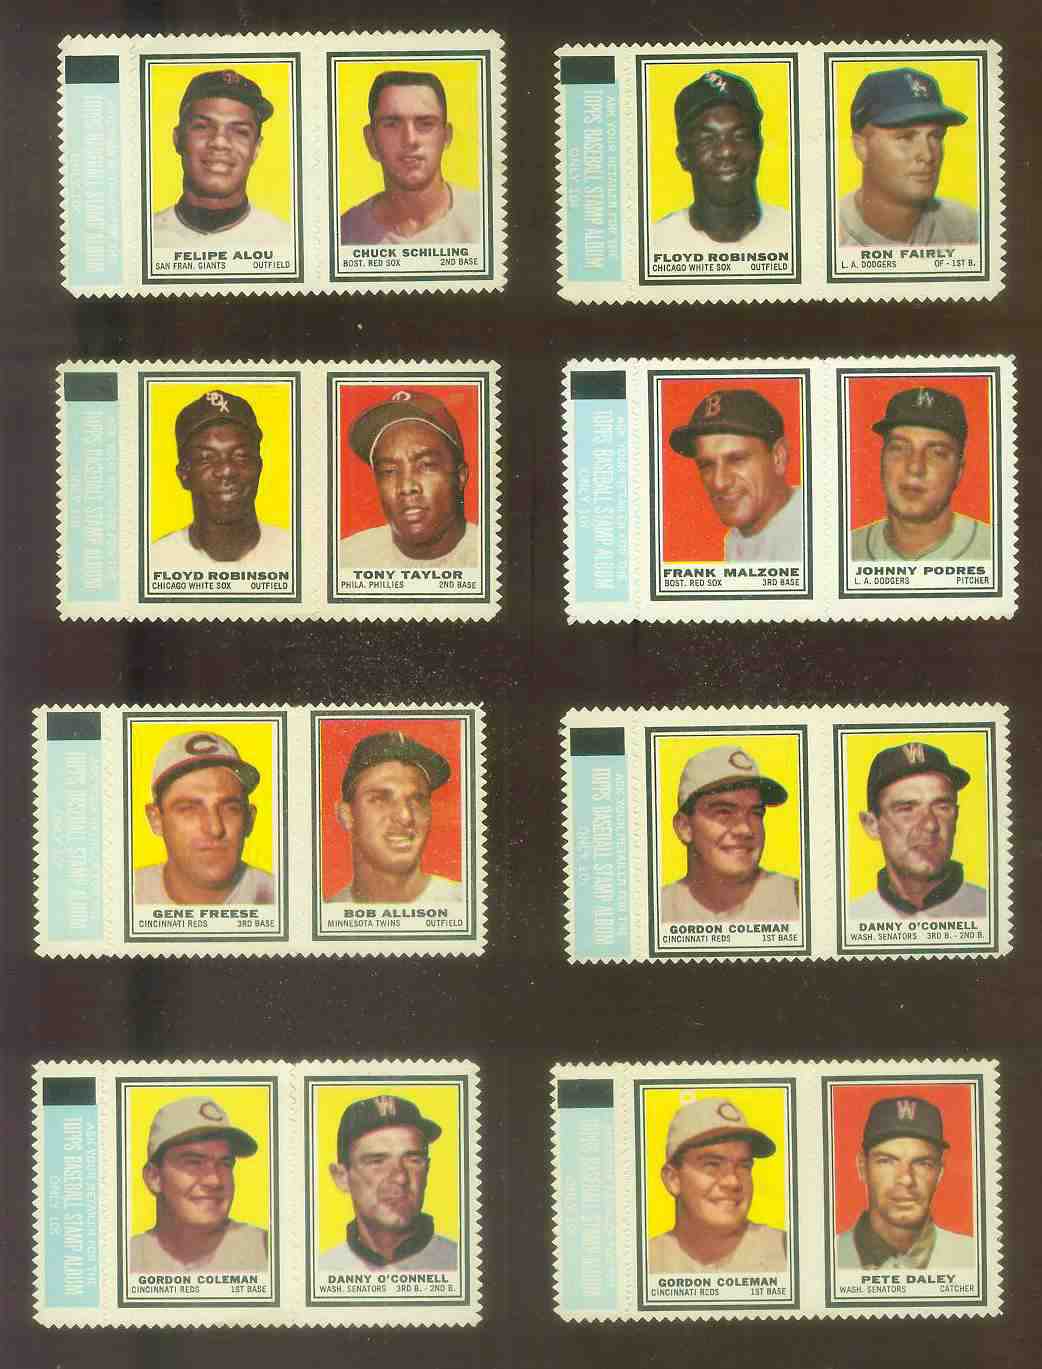   Gordon Coleman/Danny O'Connell - 1962 Topps STAMP PANEL with TAB !!! Baseball cards value